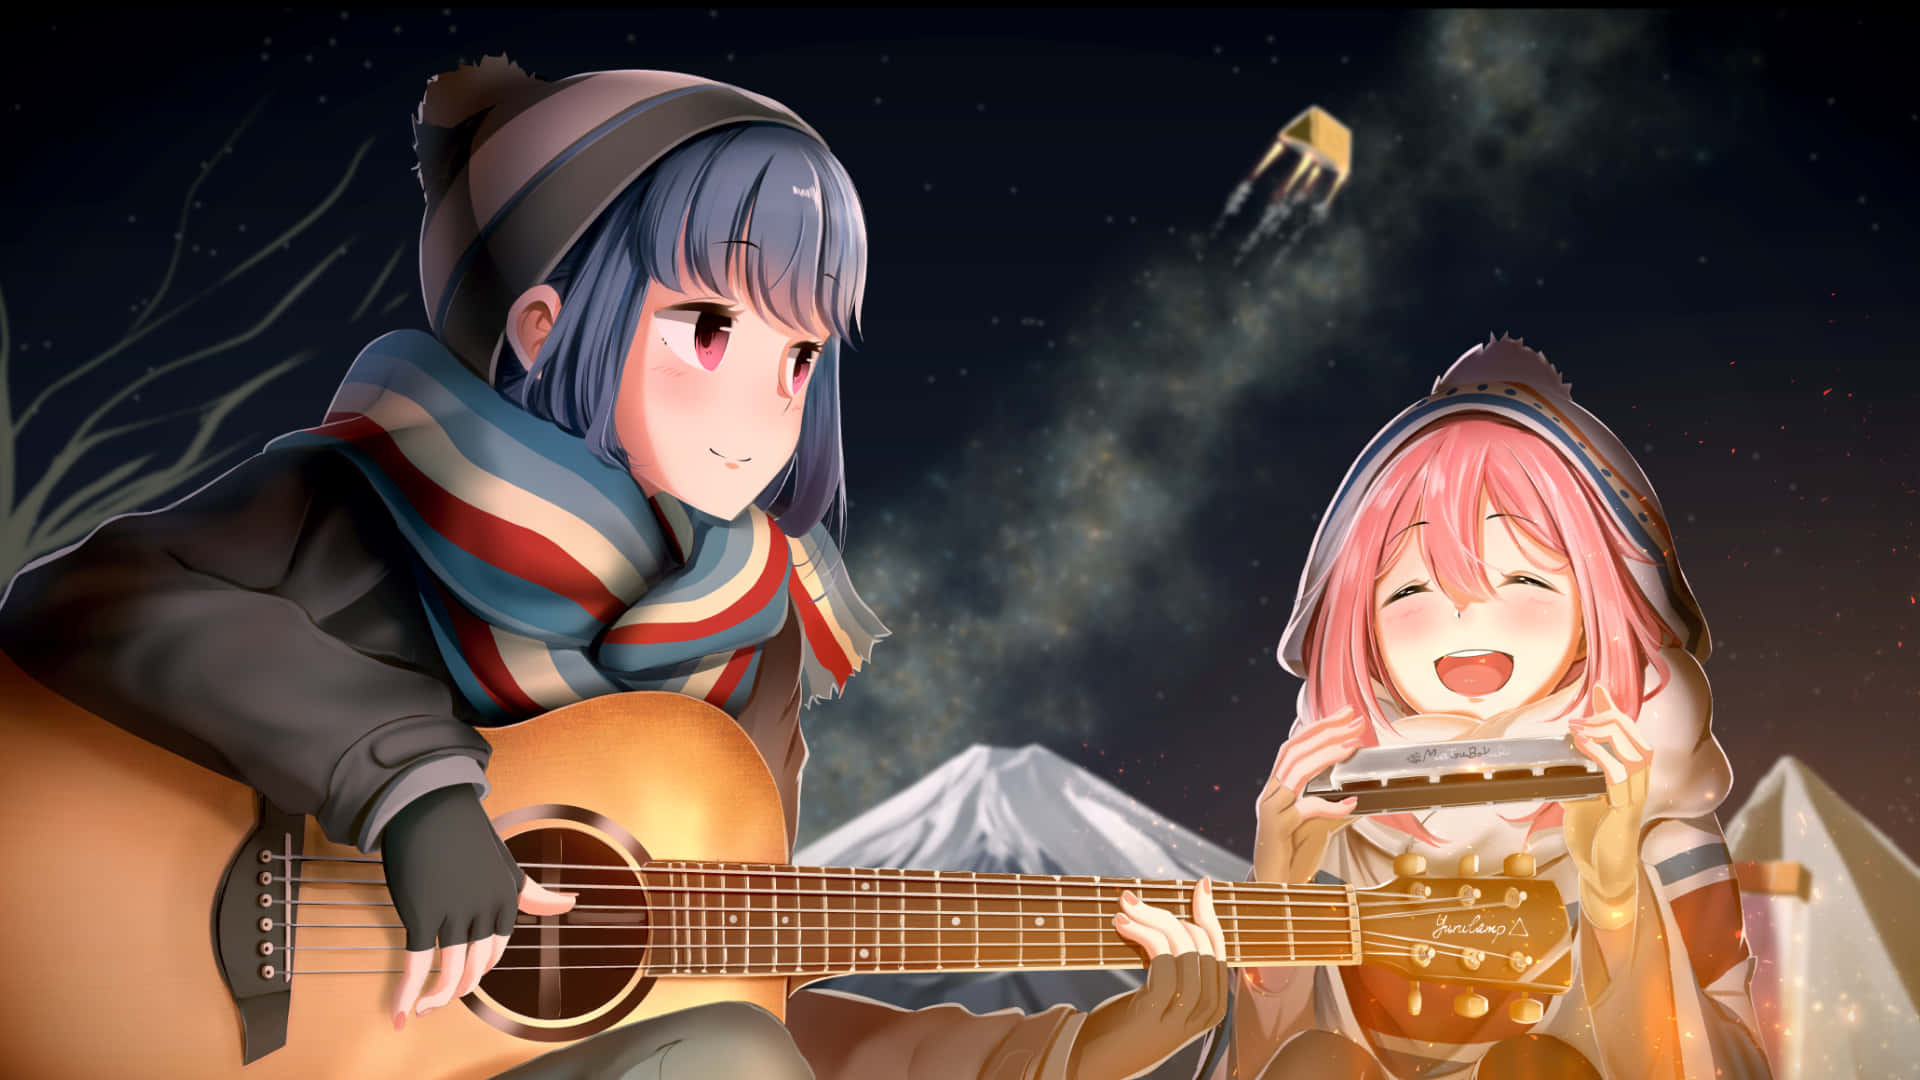 A winter night in the Japanese outdoors, where the stars shine and the campfire glows